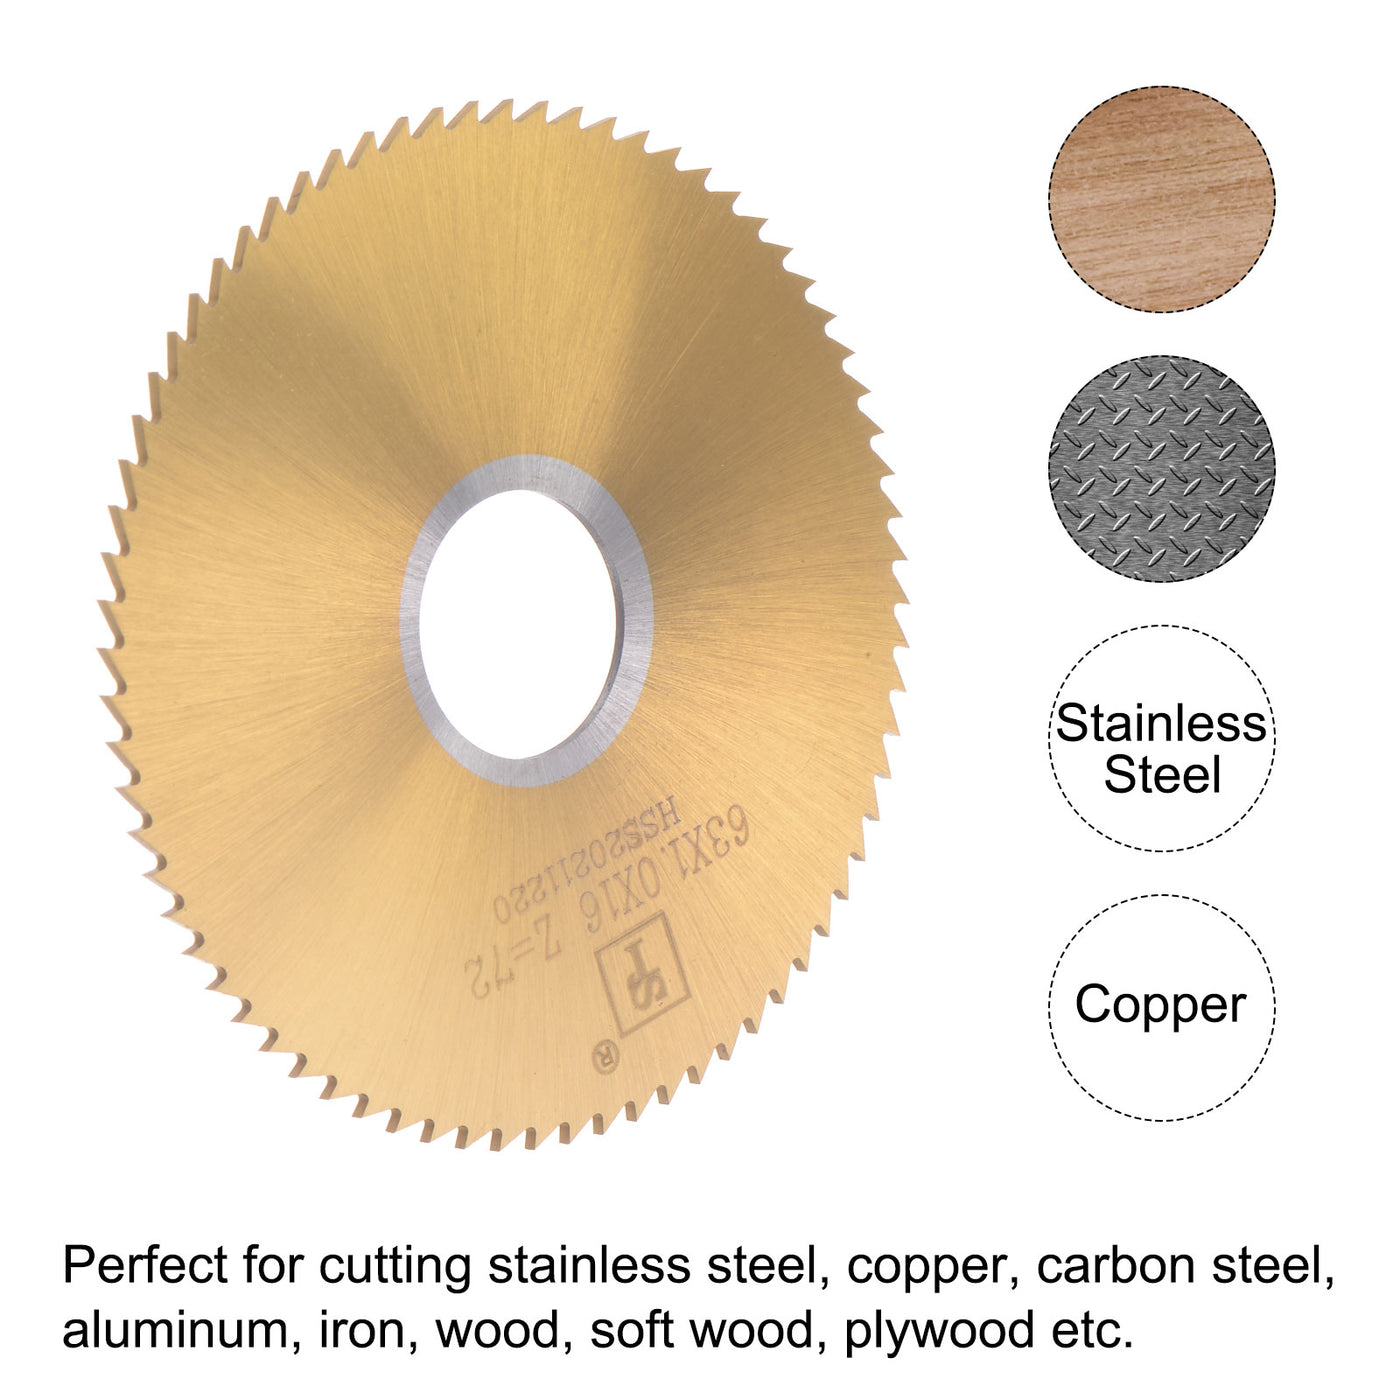 Uxcell Uxcell 60mm Dia 16mm Arbor 2mm Thick 72 Tooth Titanium Coated Circular Saw Blade